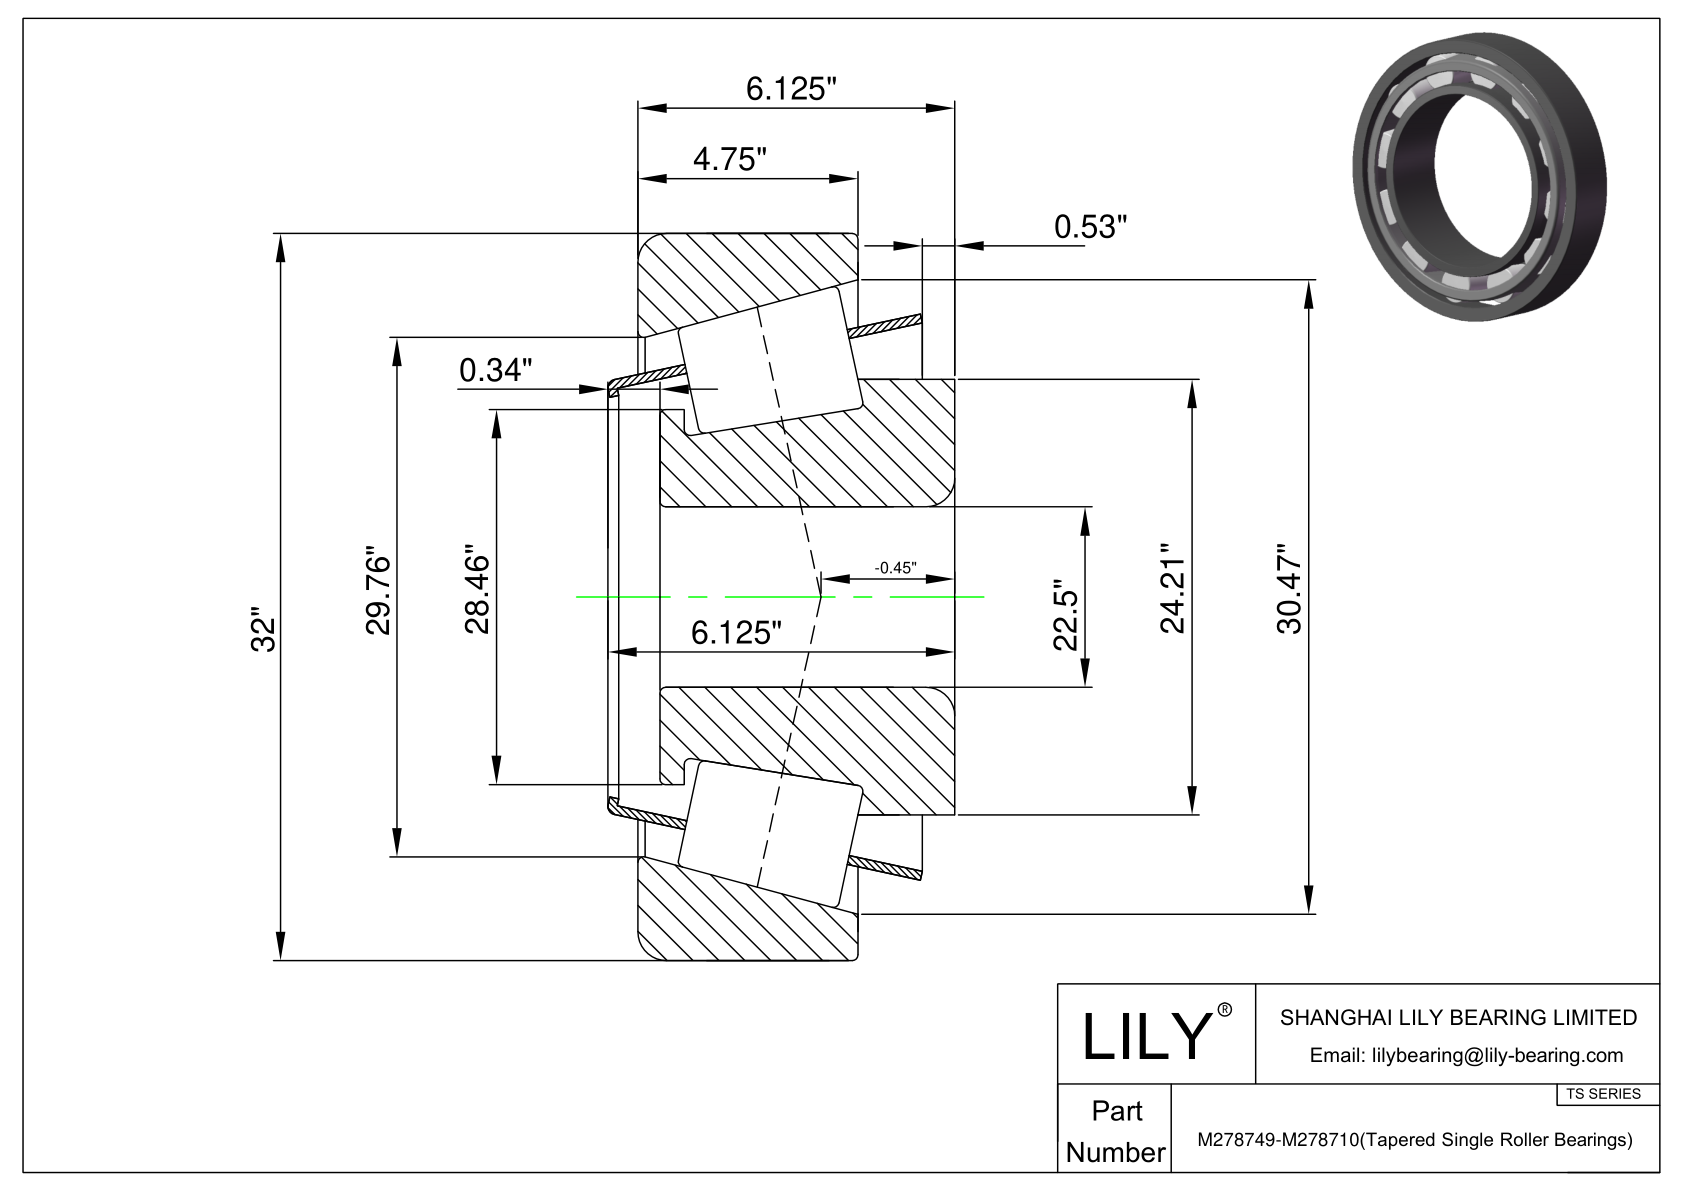 M278749-M278710 TS (Tapered Single Roller Bearings) (Imperial) cad drawing